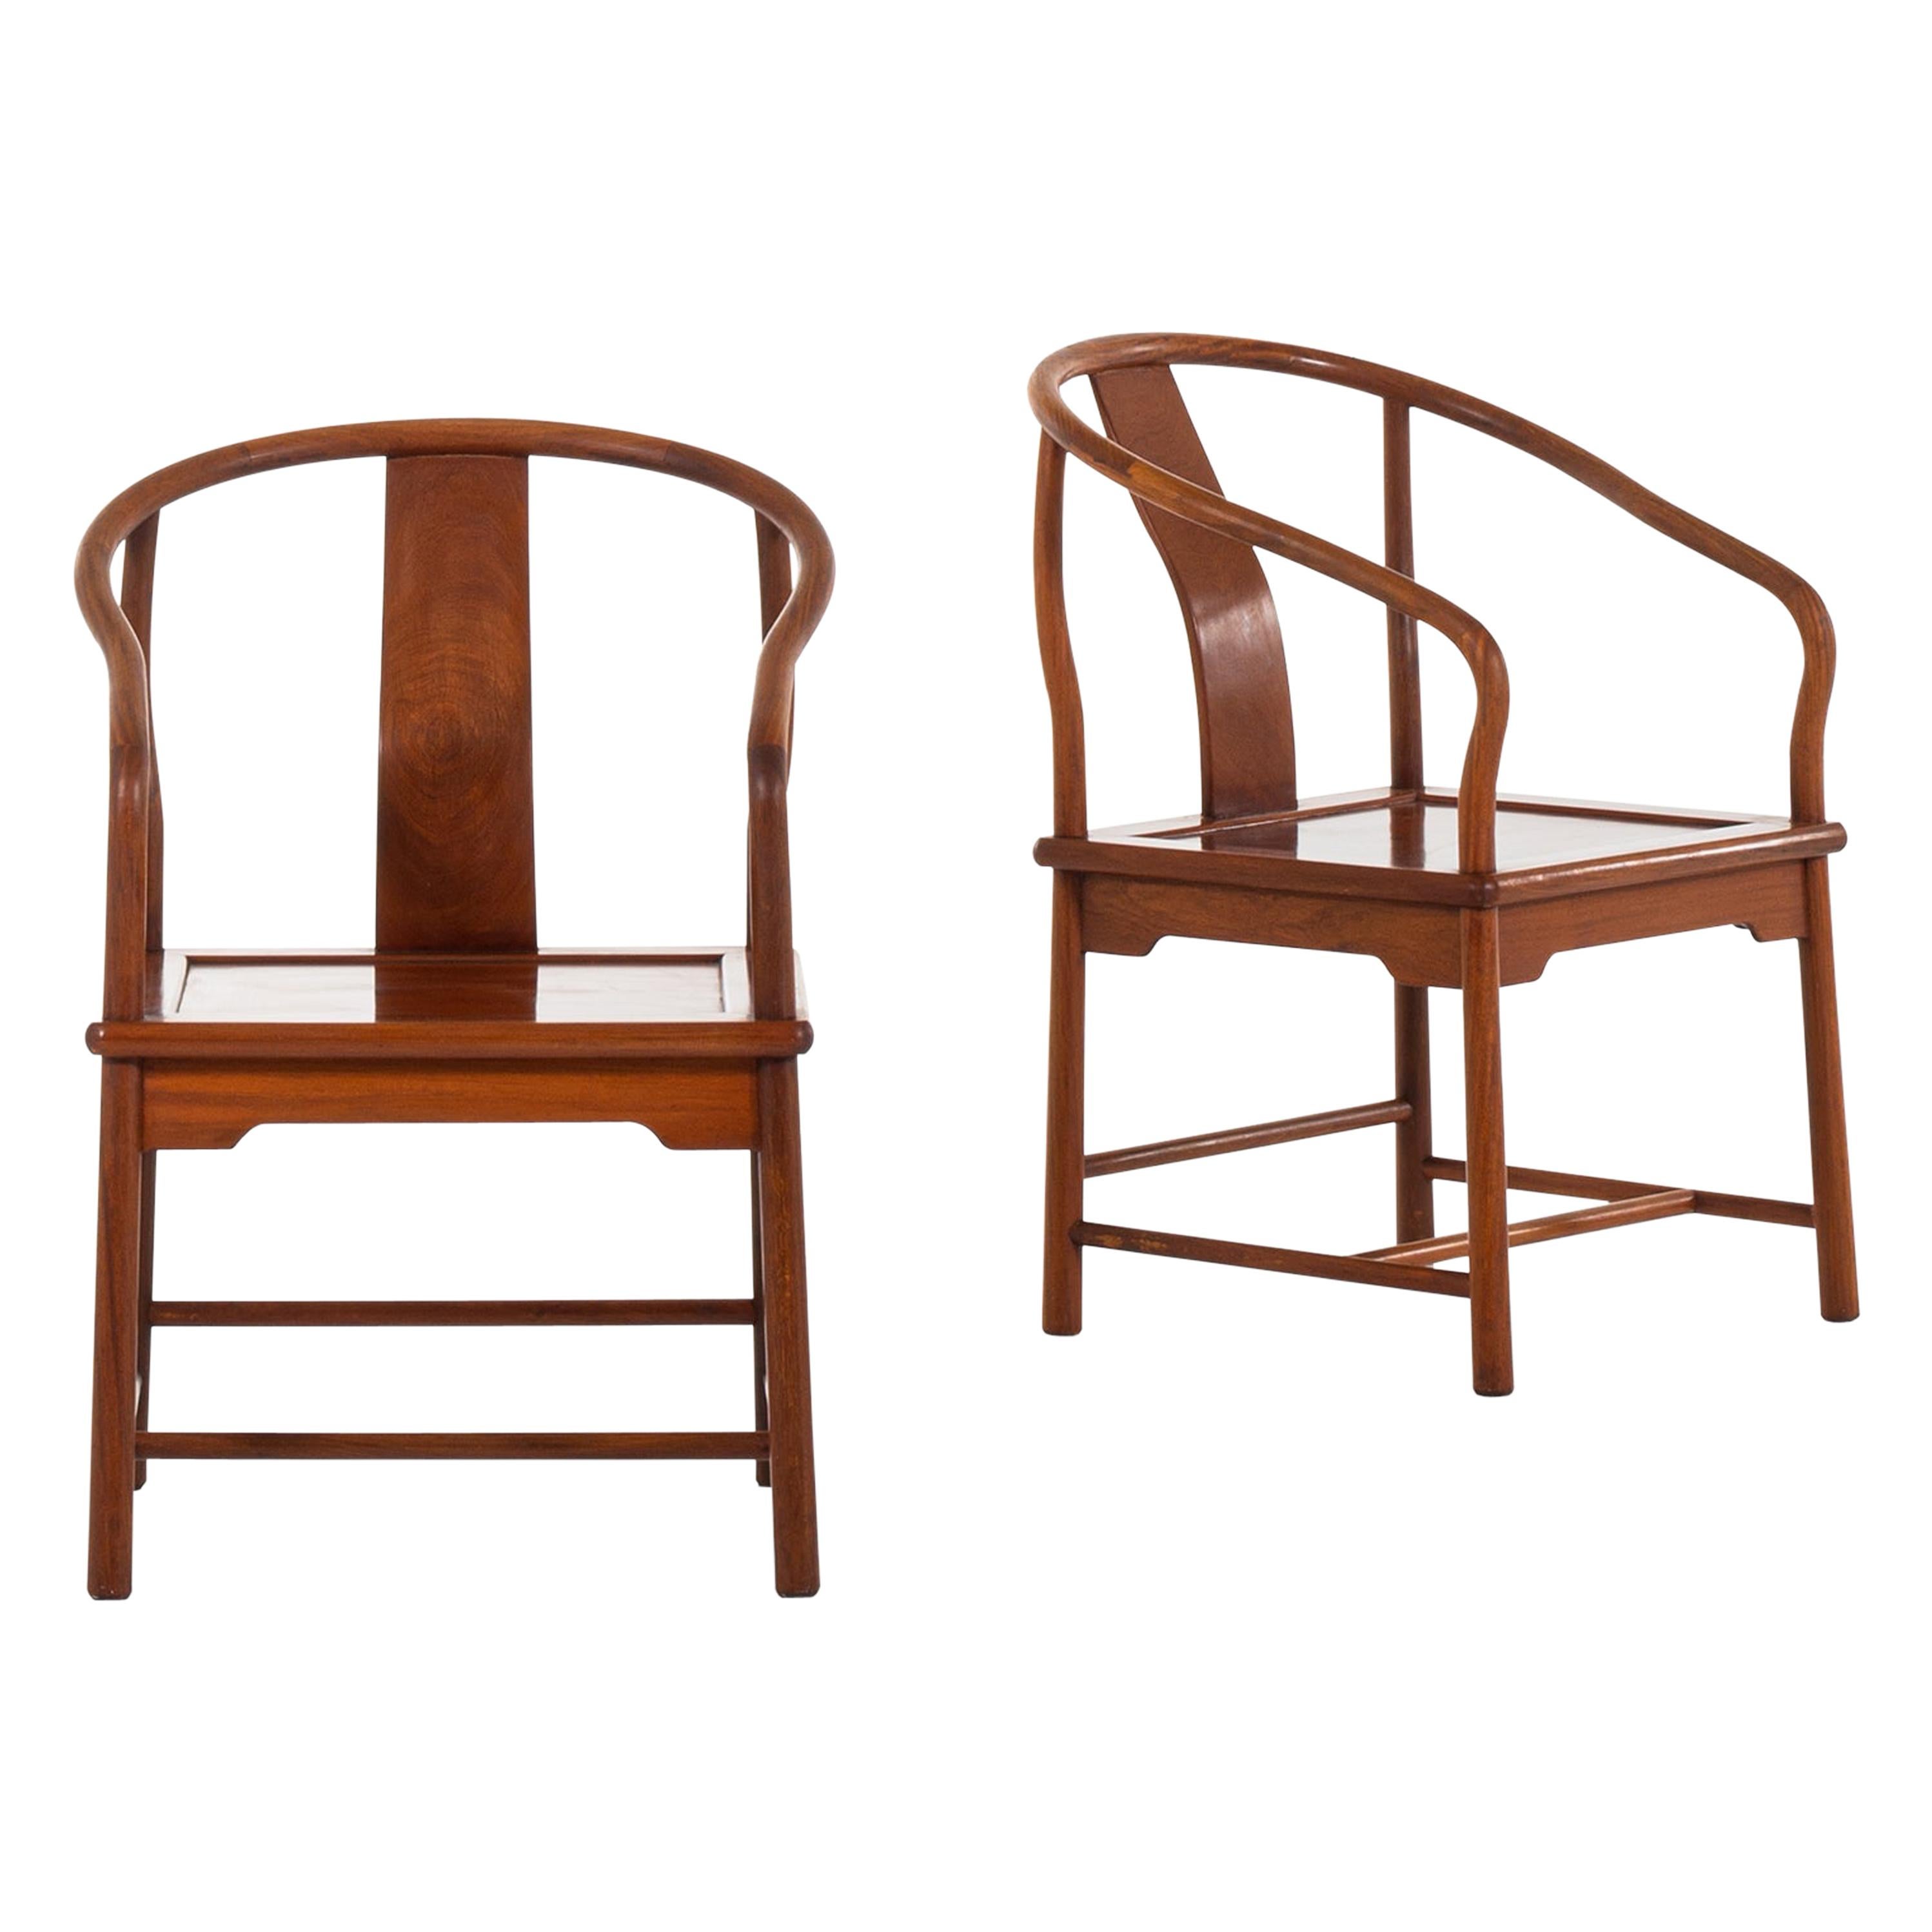 Pair of Chinese Armchairs in Mahogany